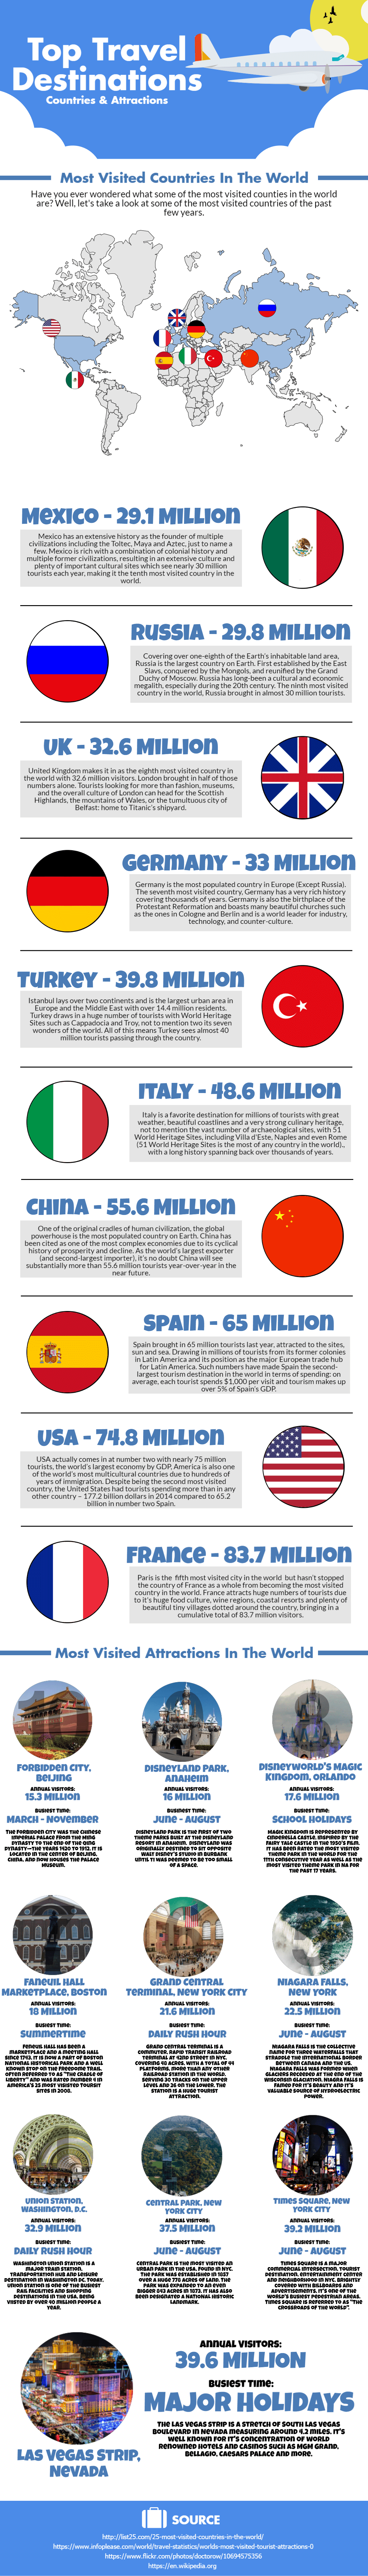 Top Travel Destinations: Countries & Attractions Infographic